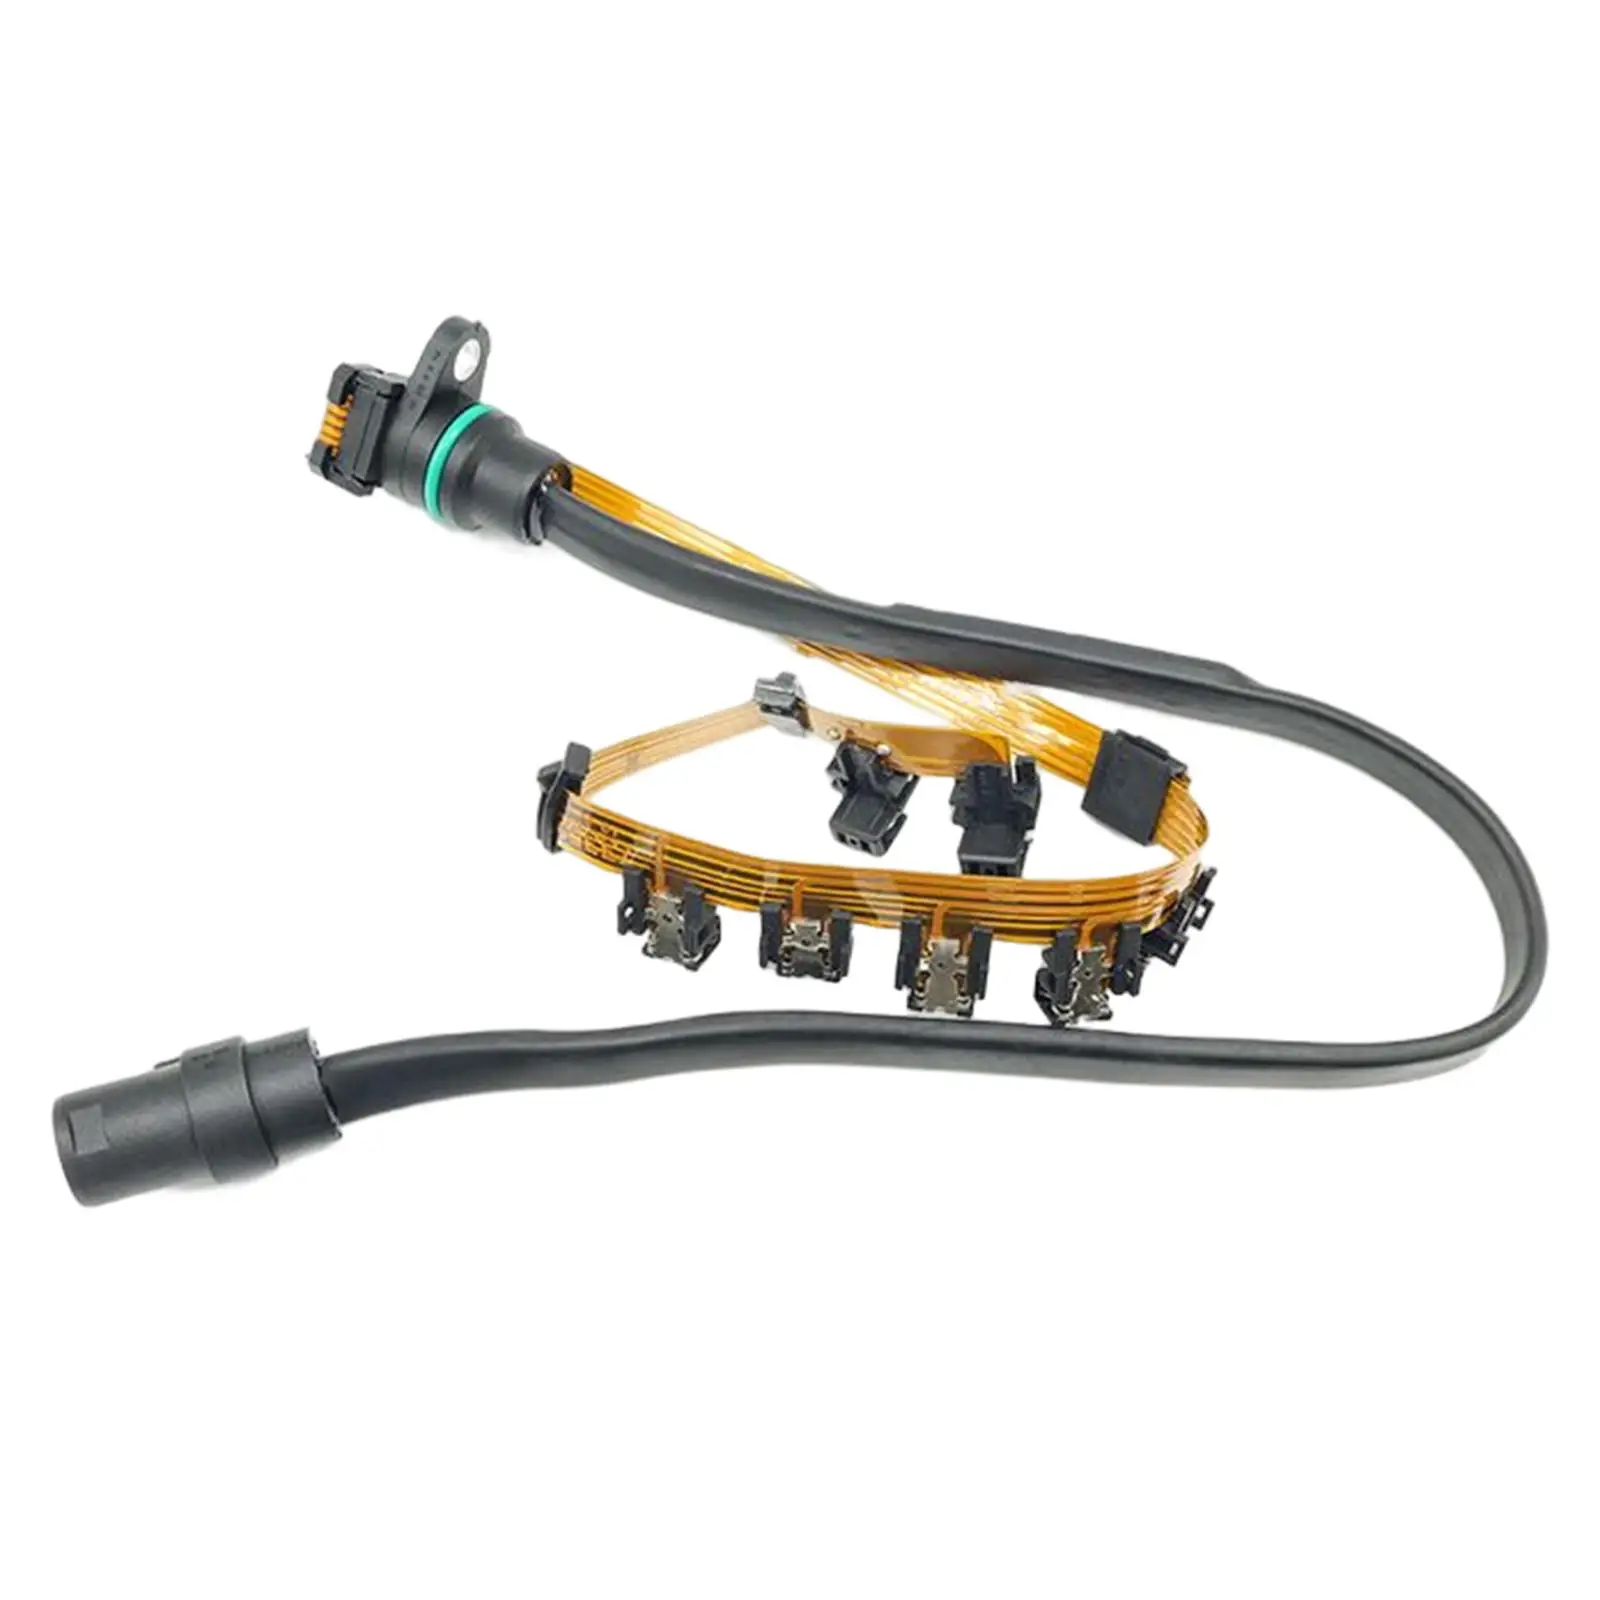 Auto Transmission Harness, Repair Part 01M 927 365 Cable Ribbon Fit for VW Golf Jetta Beetle